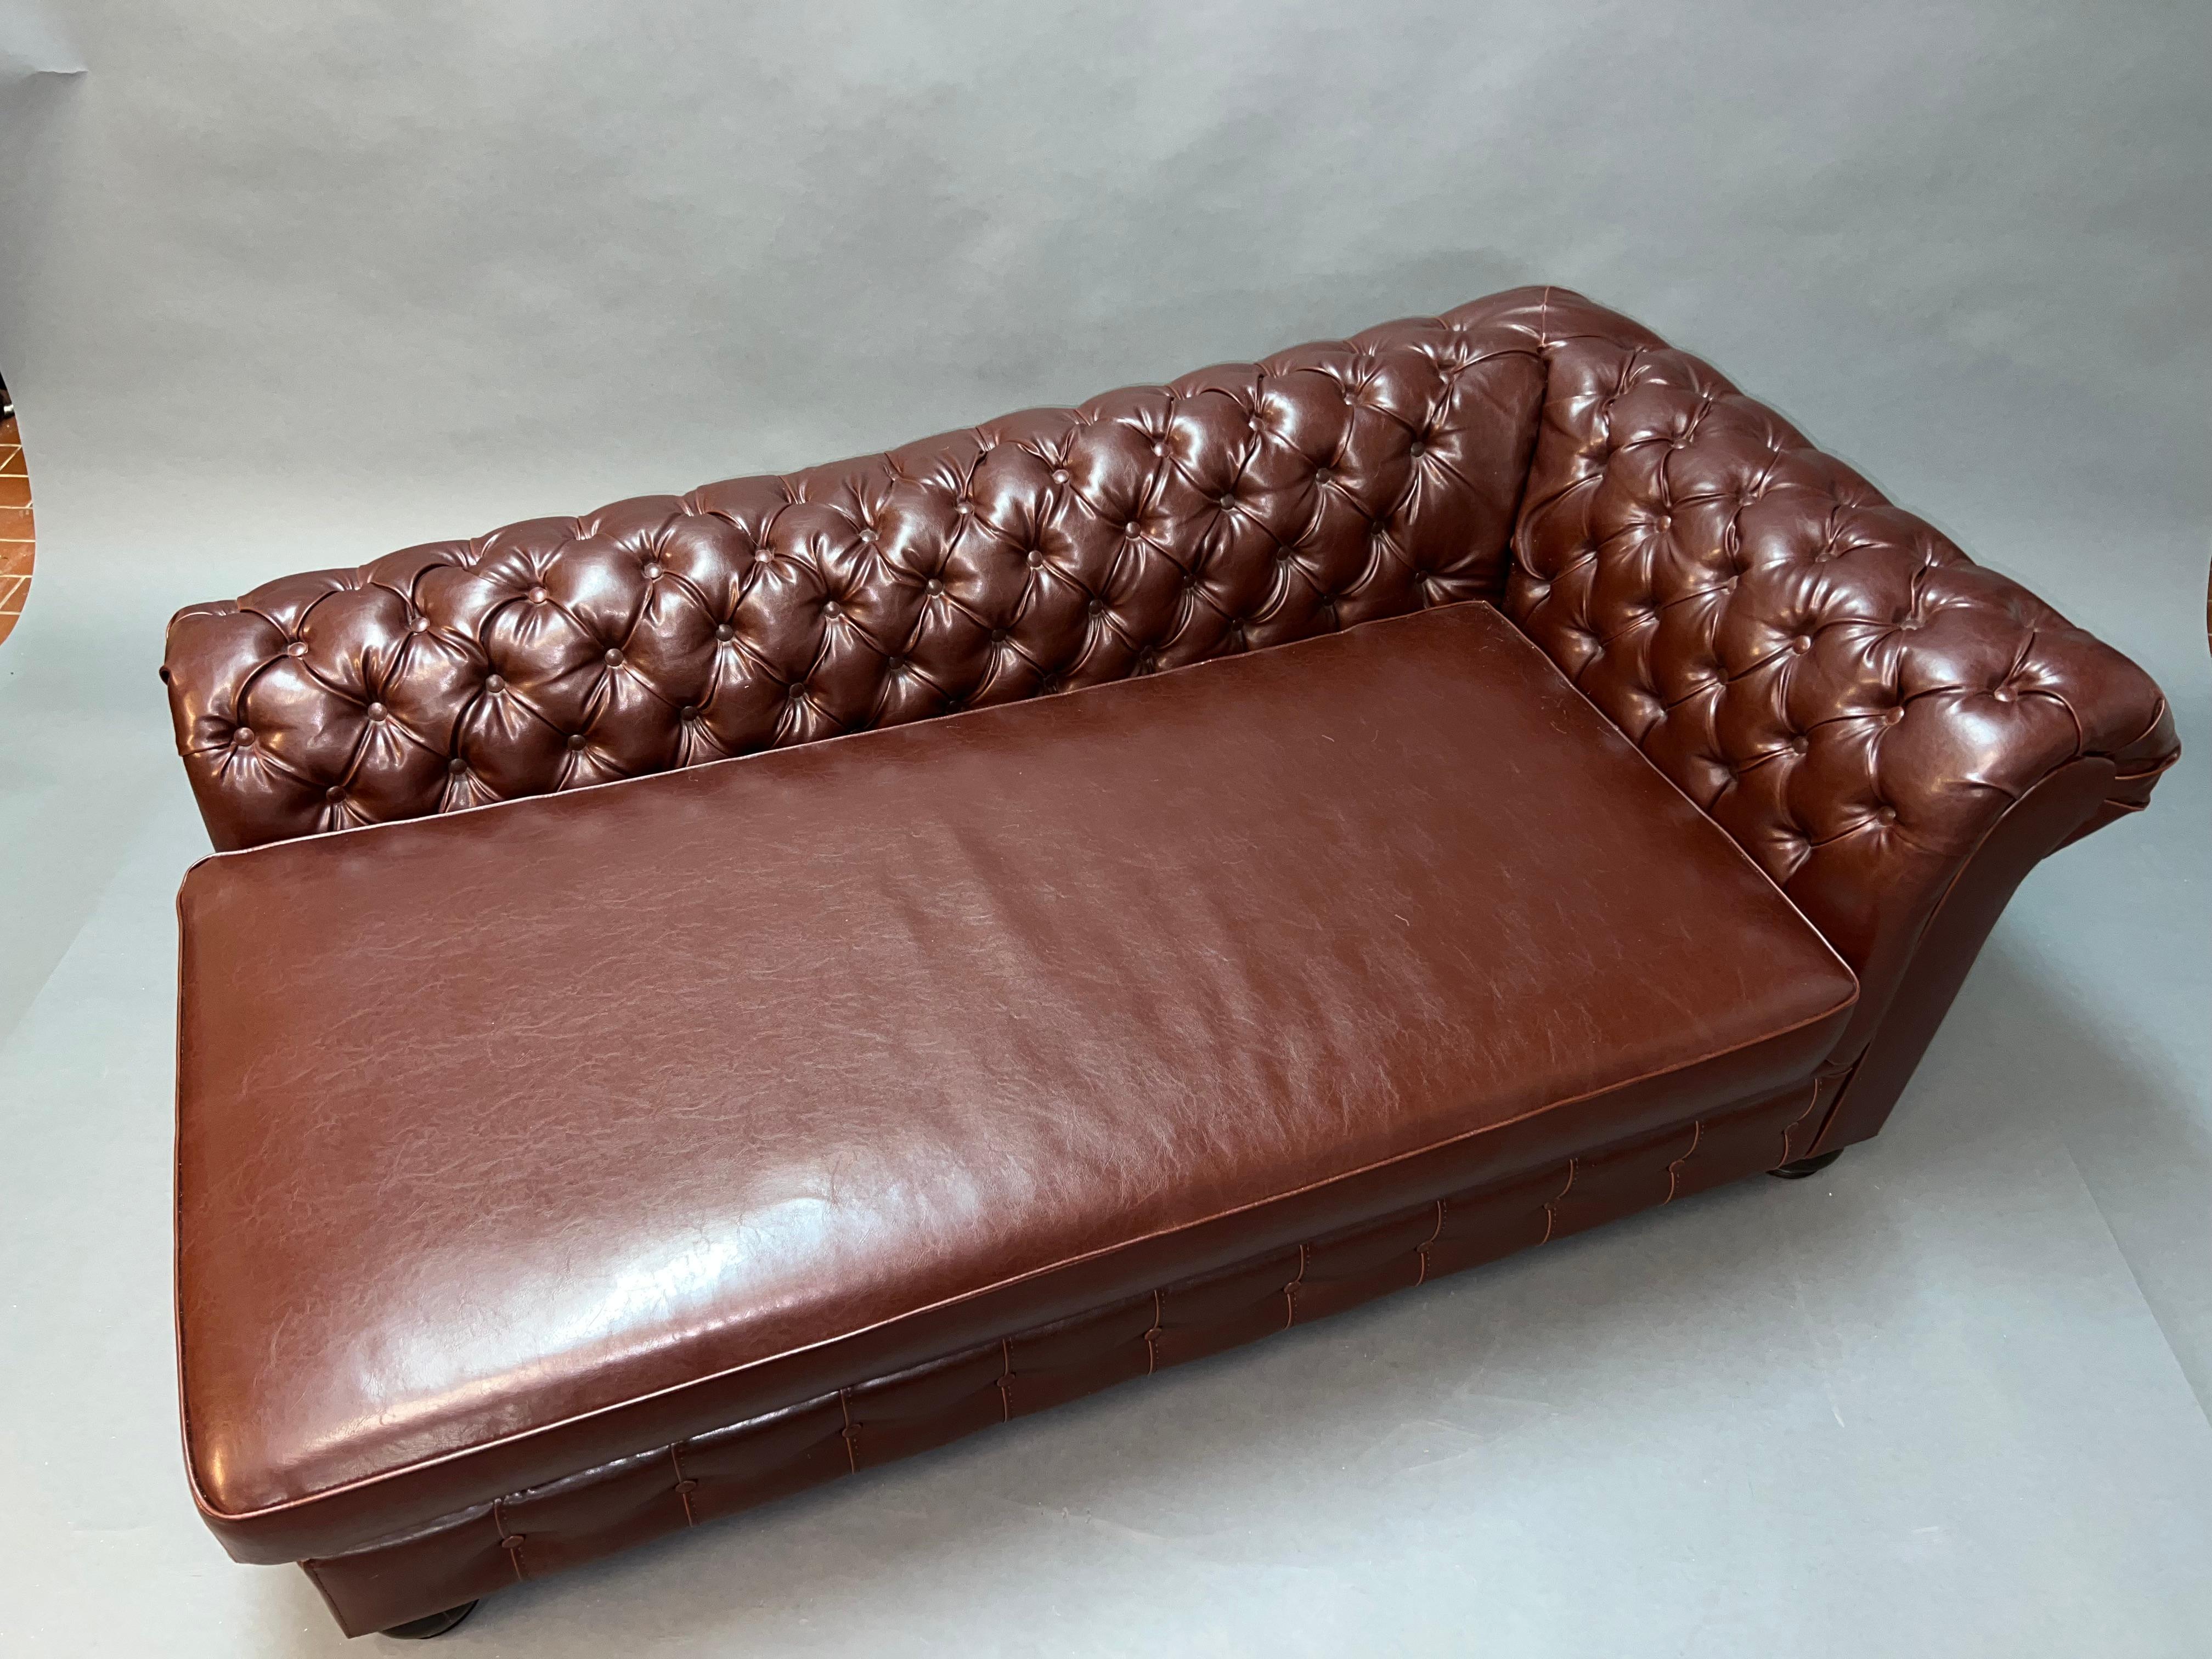 We are delighted to offer for sale this lovely brown leather Chesterfield chaise lounge daybed.

A very good looking well made and exceptionally comfortable piece.

Its made of a leather lookalike.